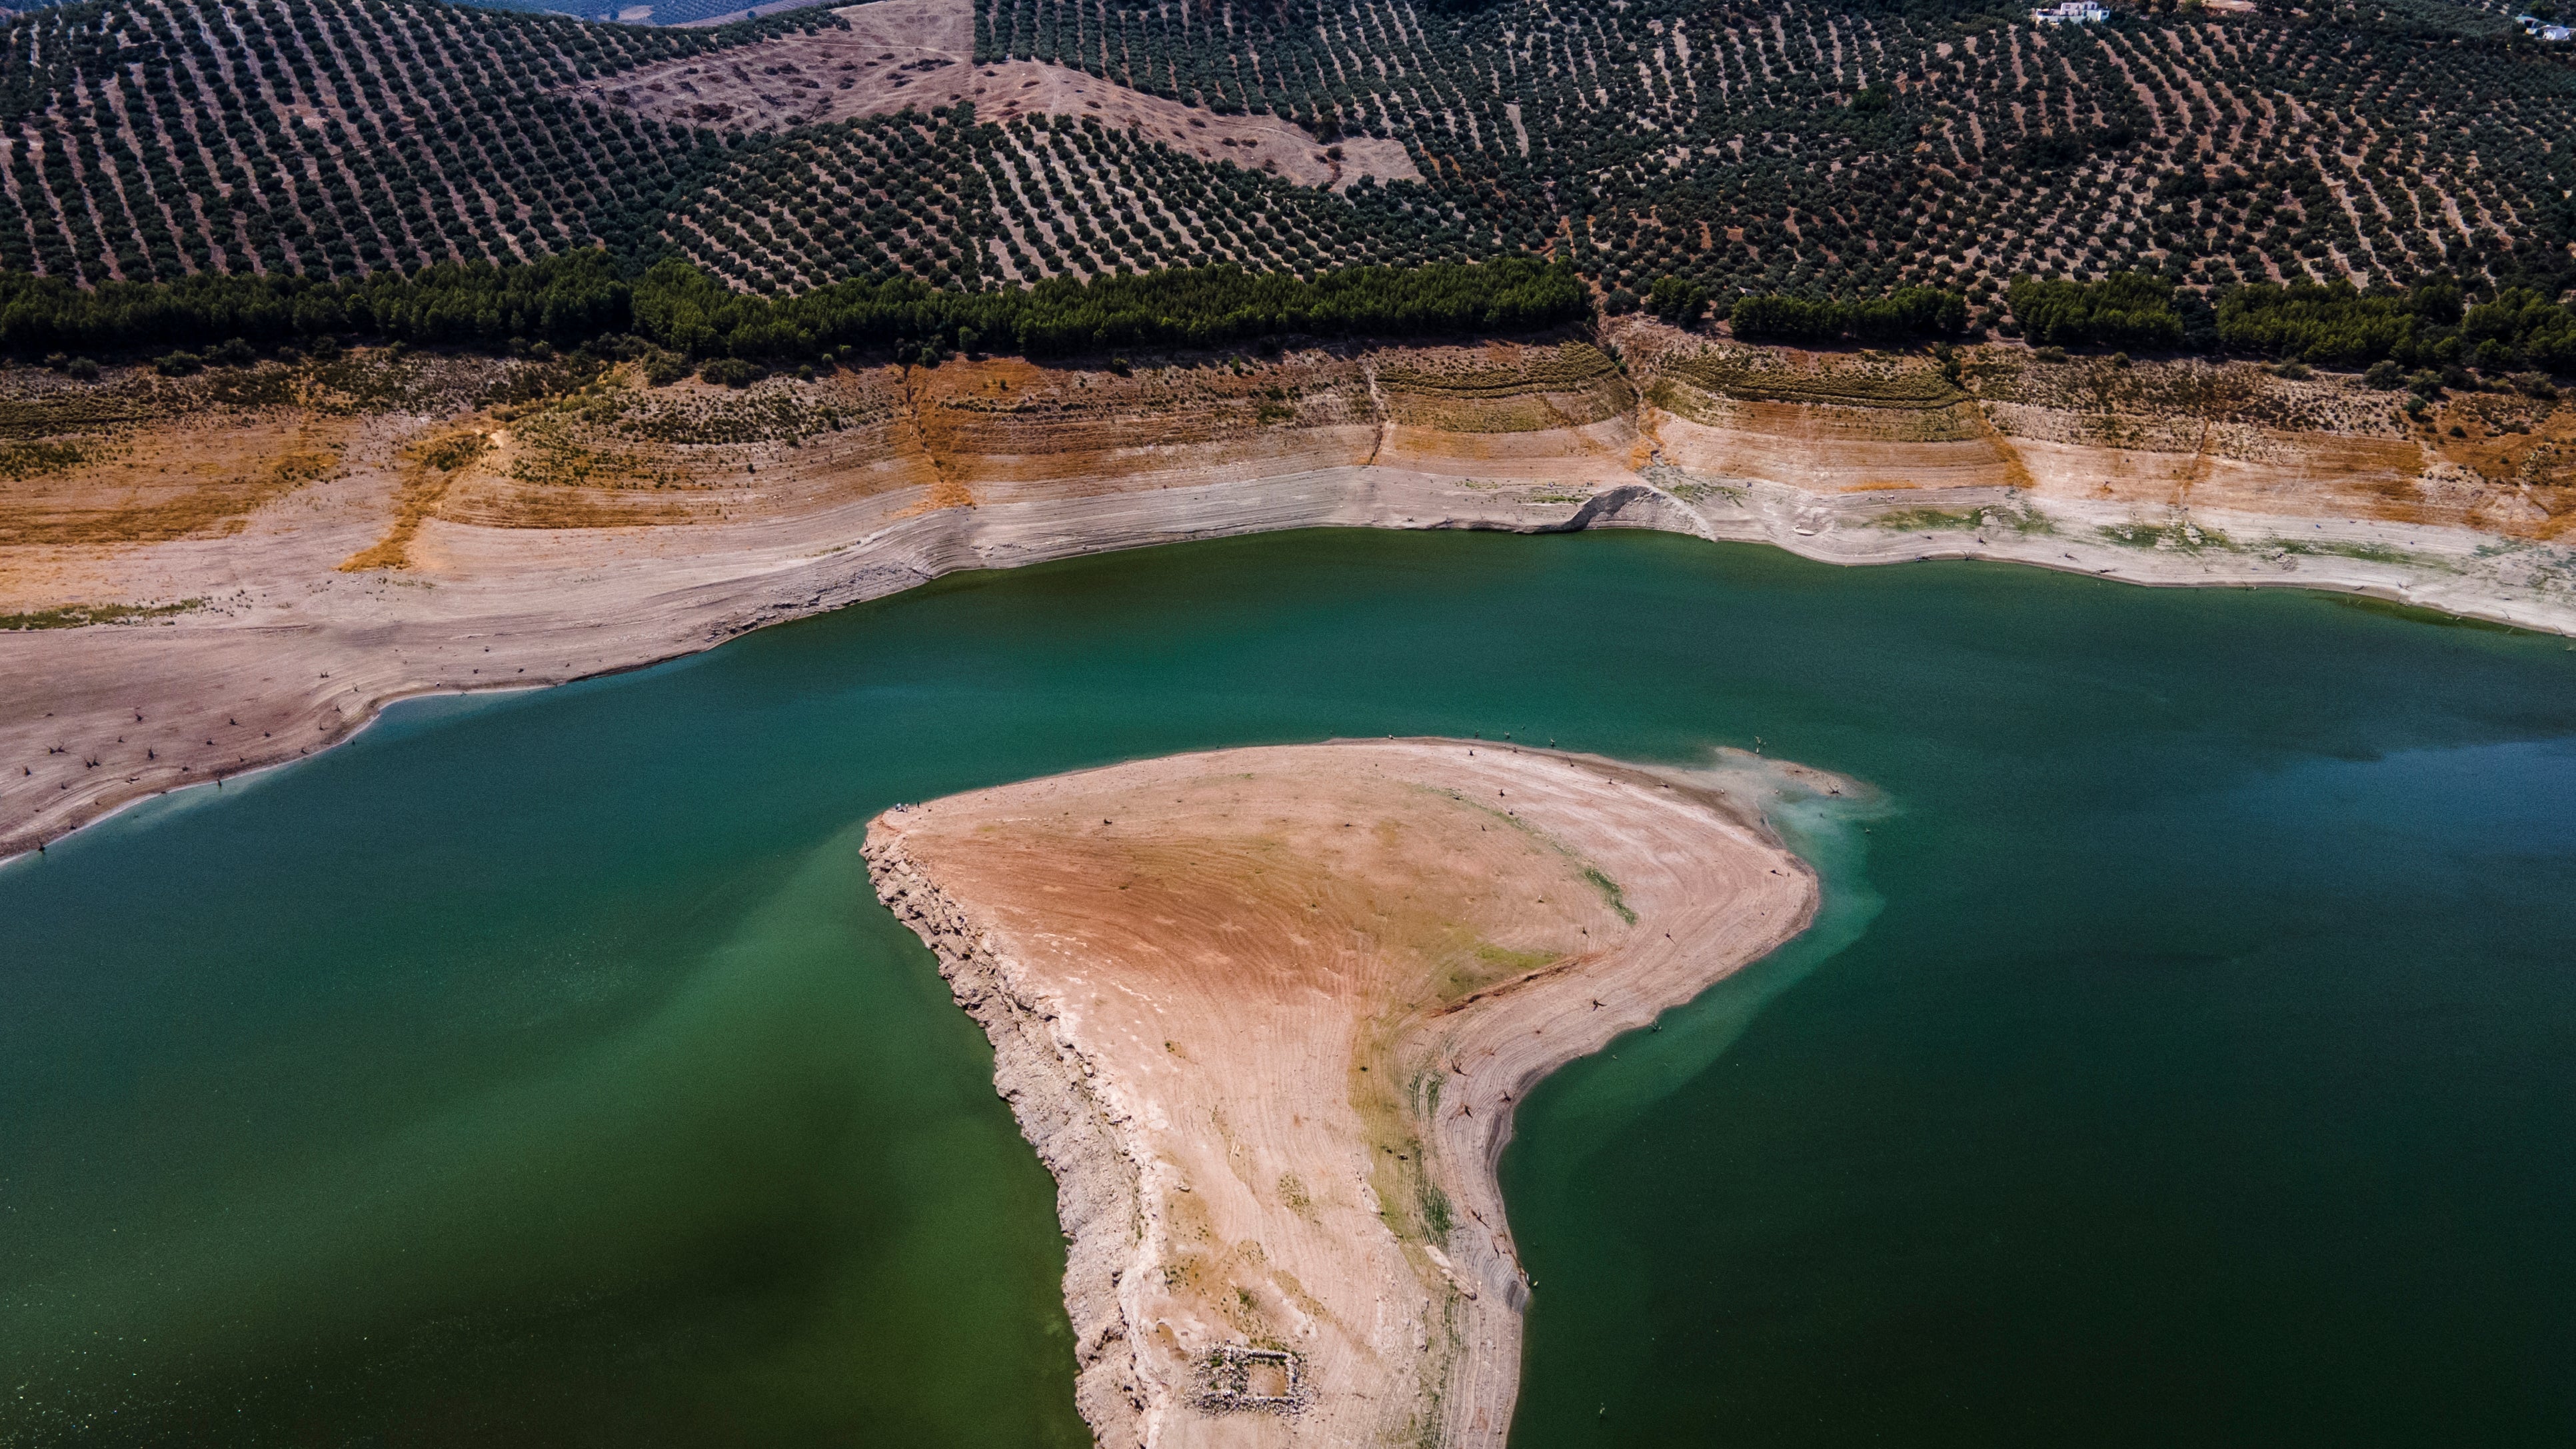 Low water in the Iznájar reservoir bordered by olive trees. (Photo: Carlos Gil, Getty Images)